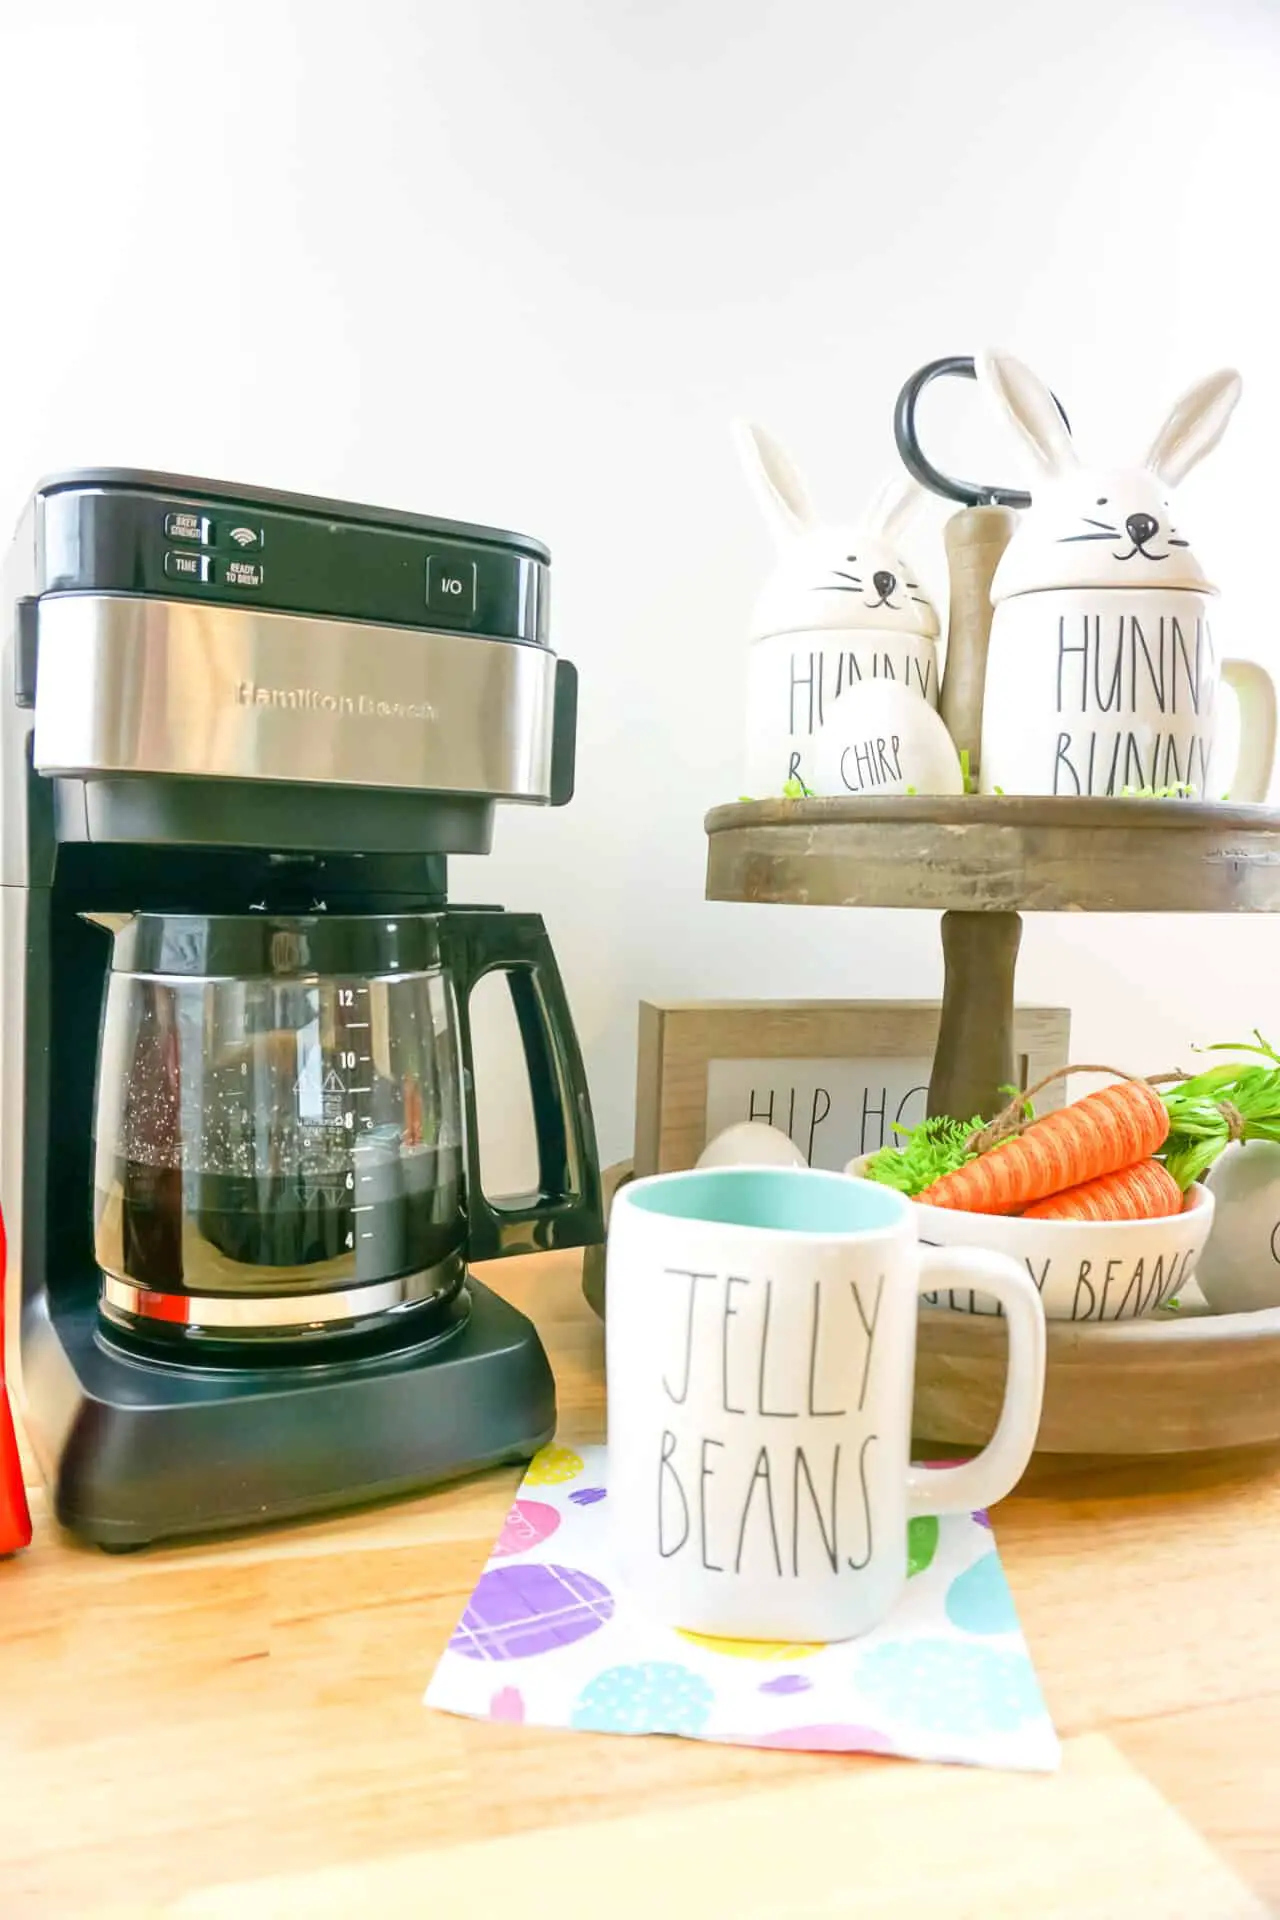 Hamilton Beach Works with Alexa Smart Coffee Maker lets you make commands  by your voice » Gadget Flow